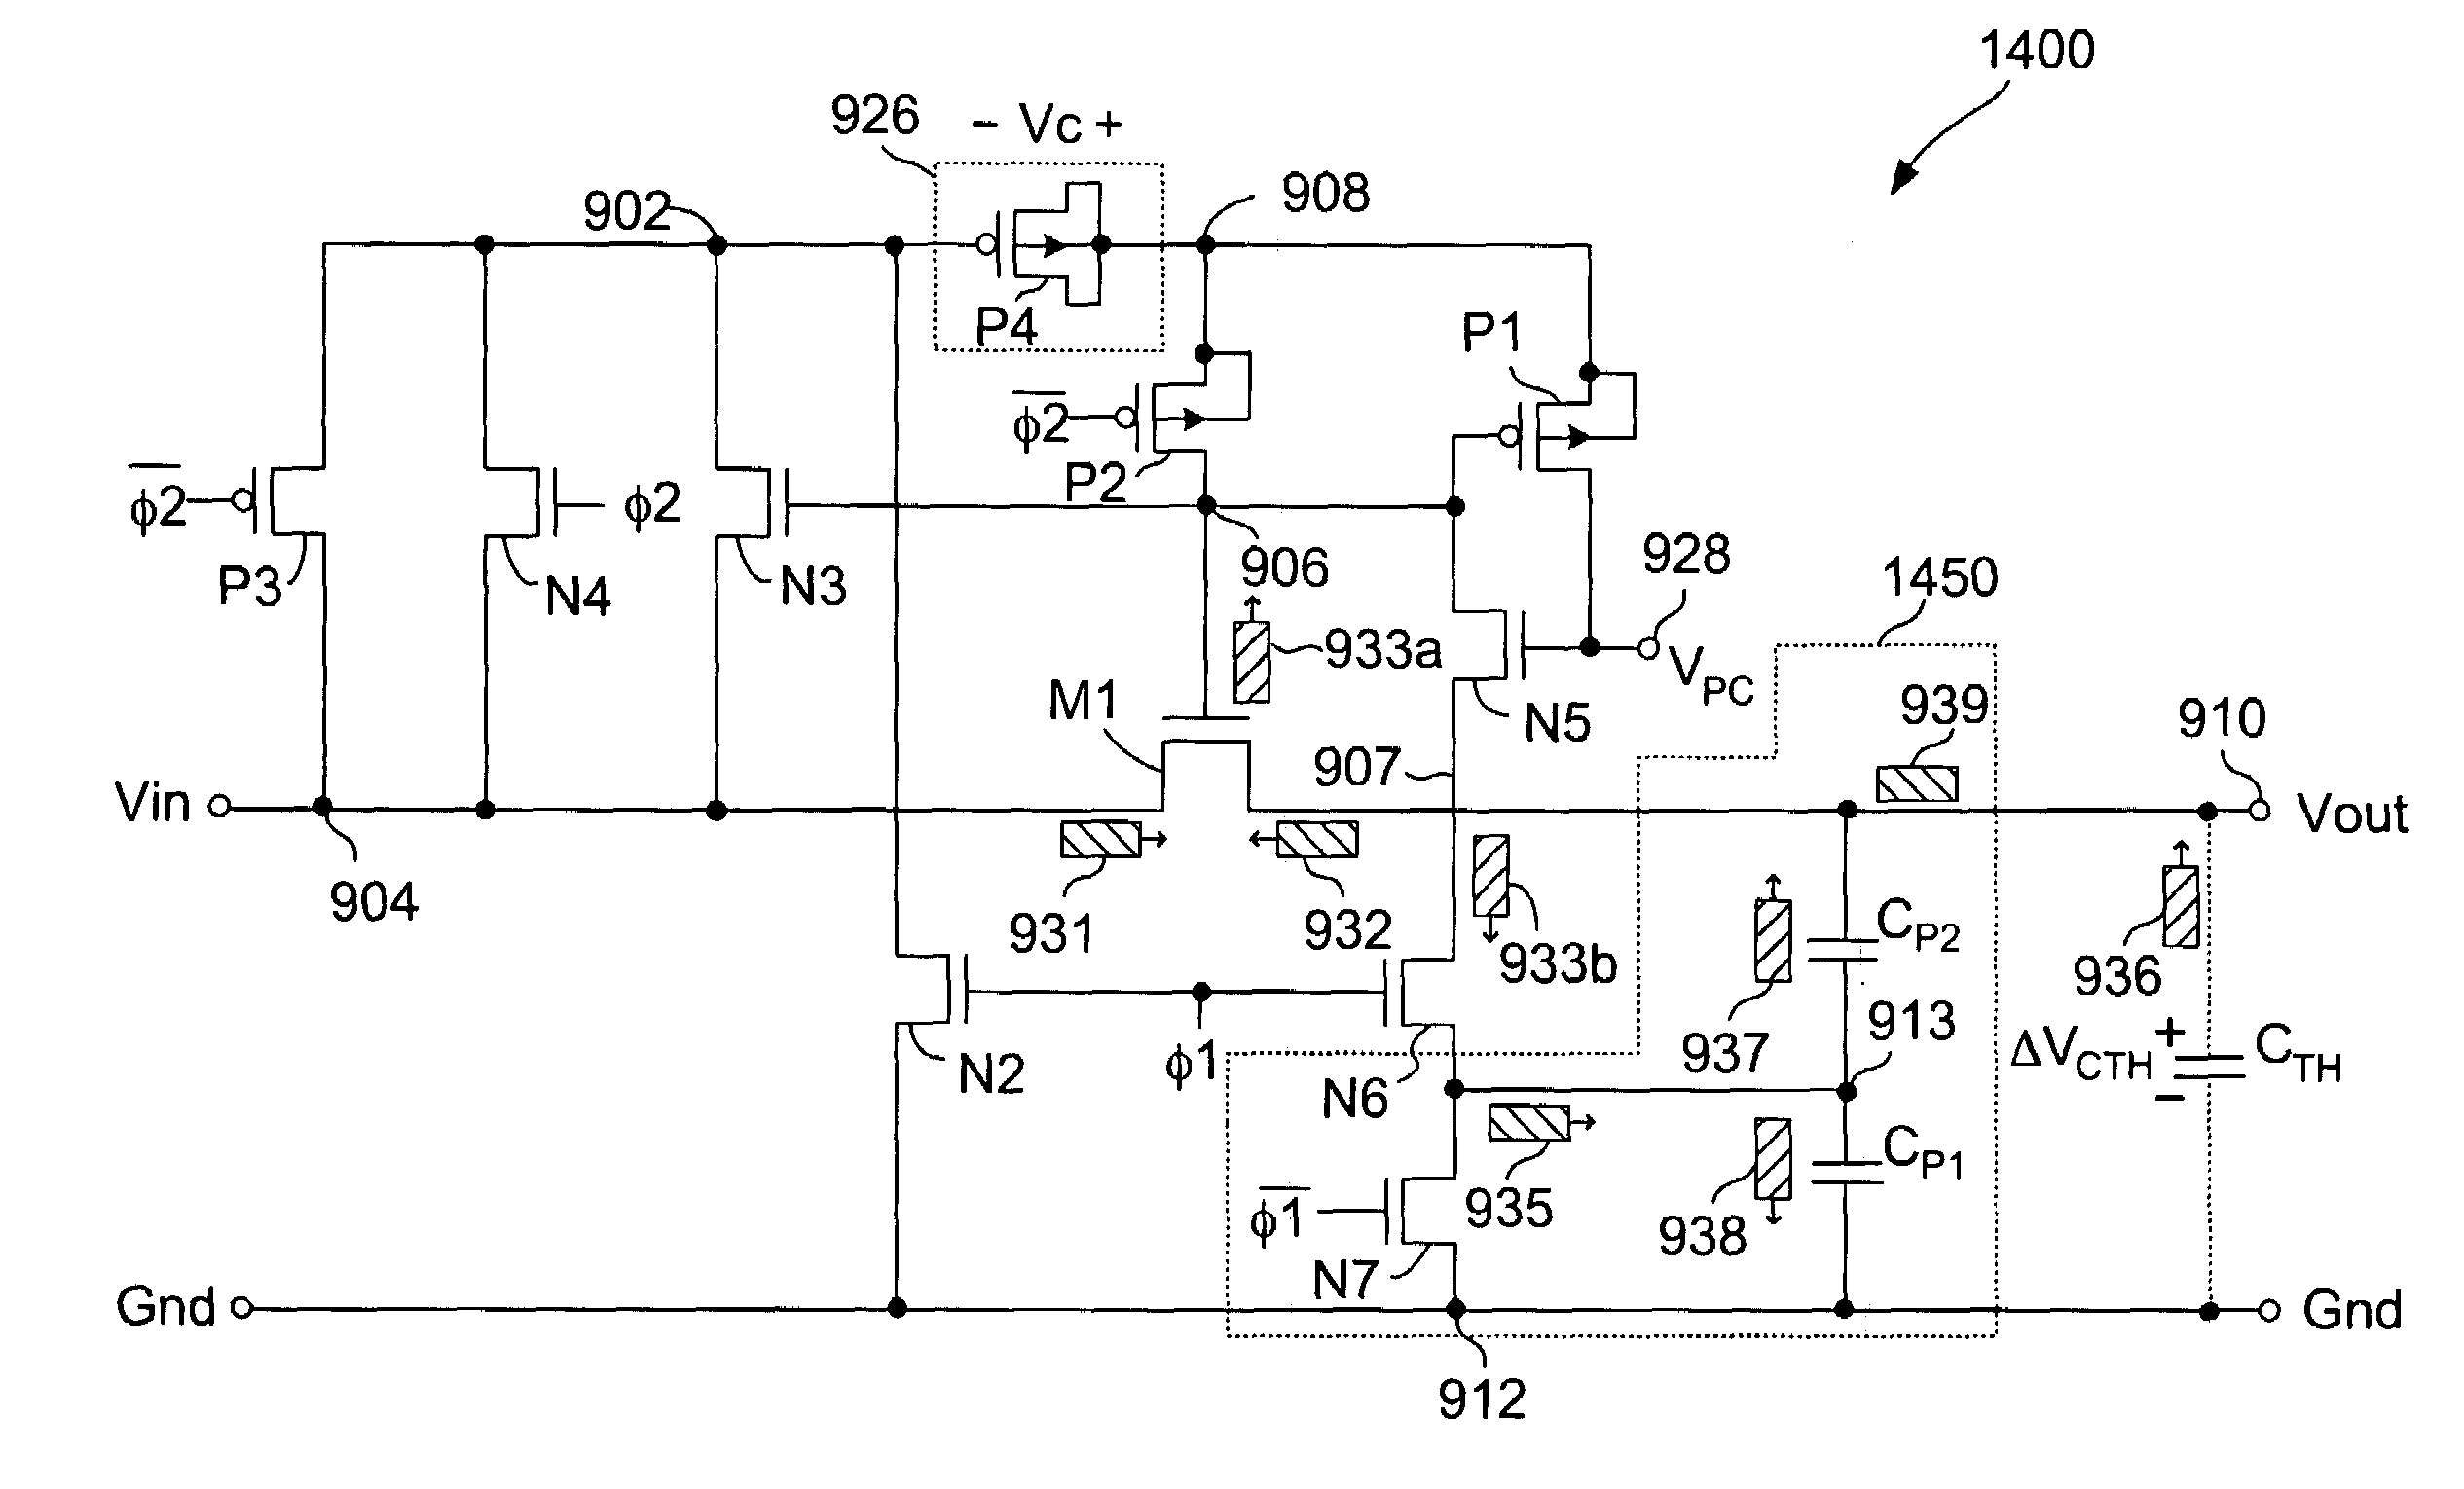 Constant RON switch circuit with low distortion and reduction of pedestal errors